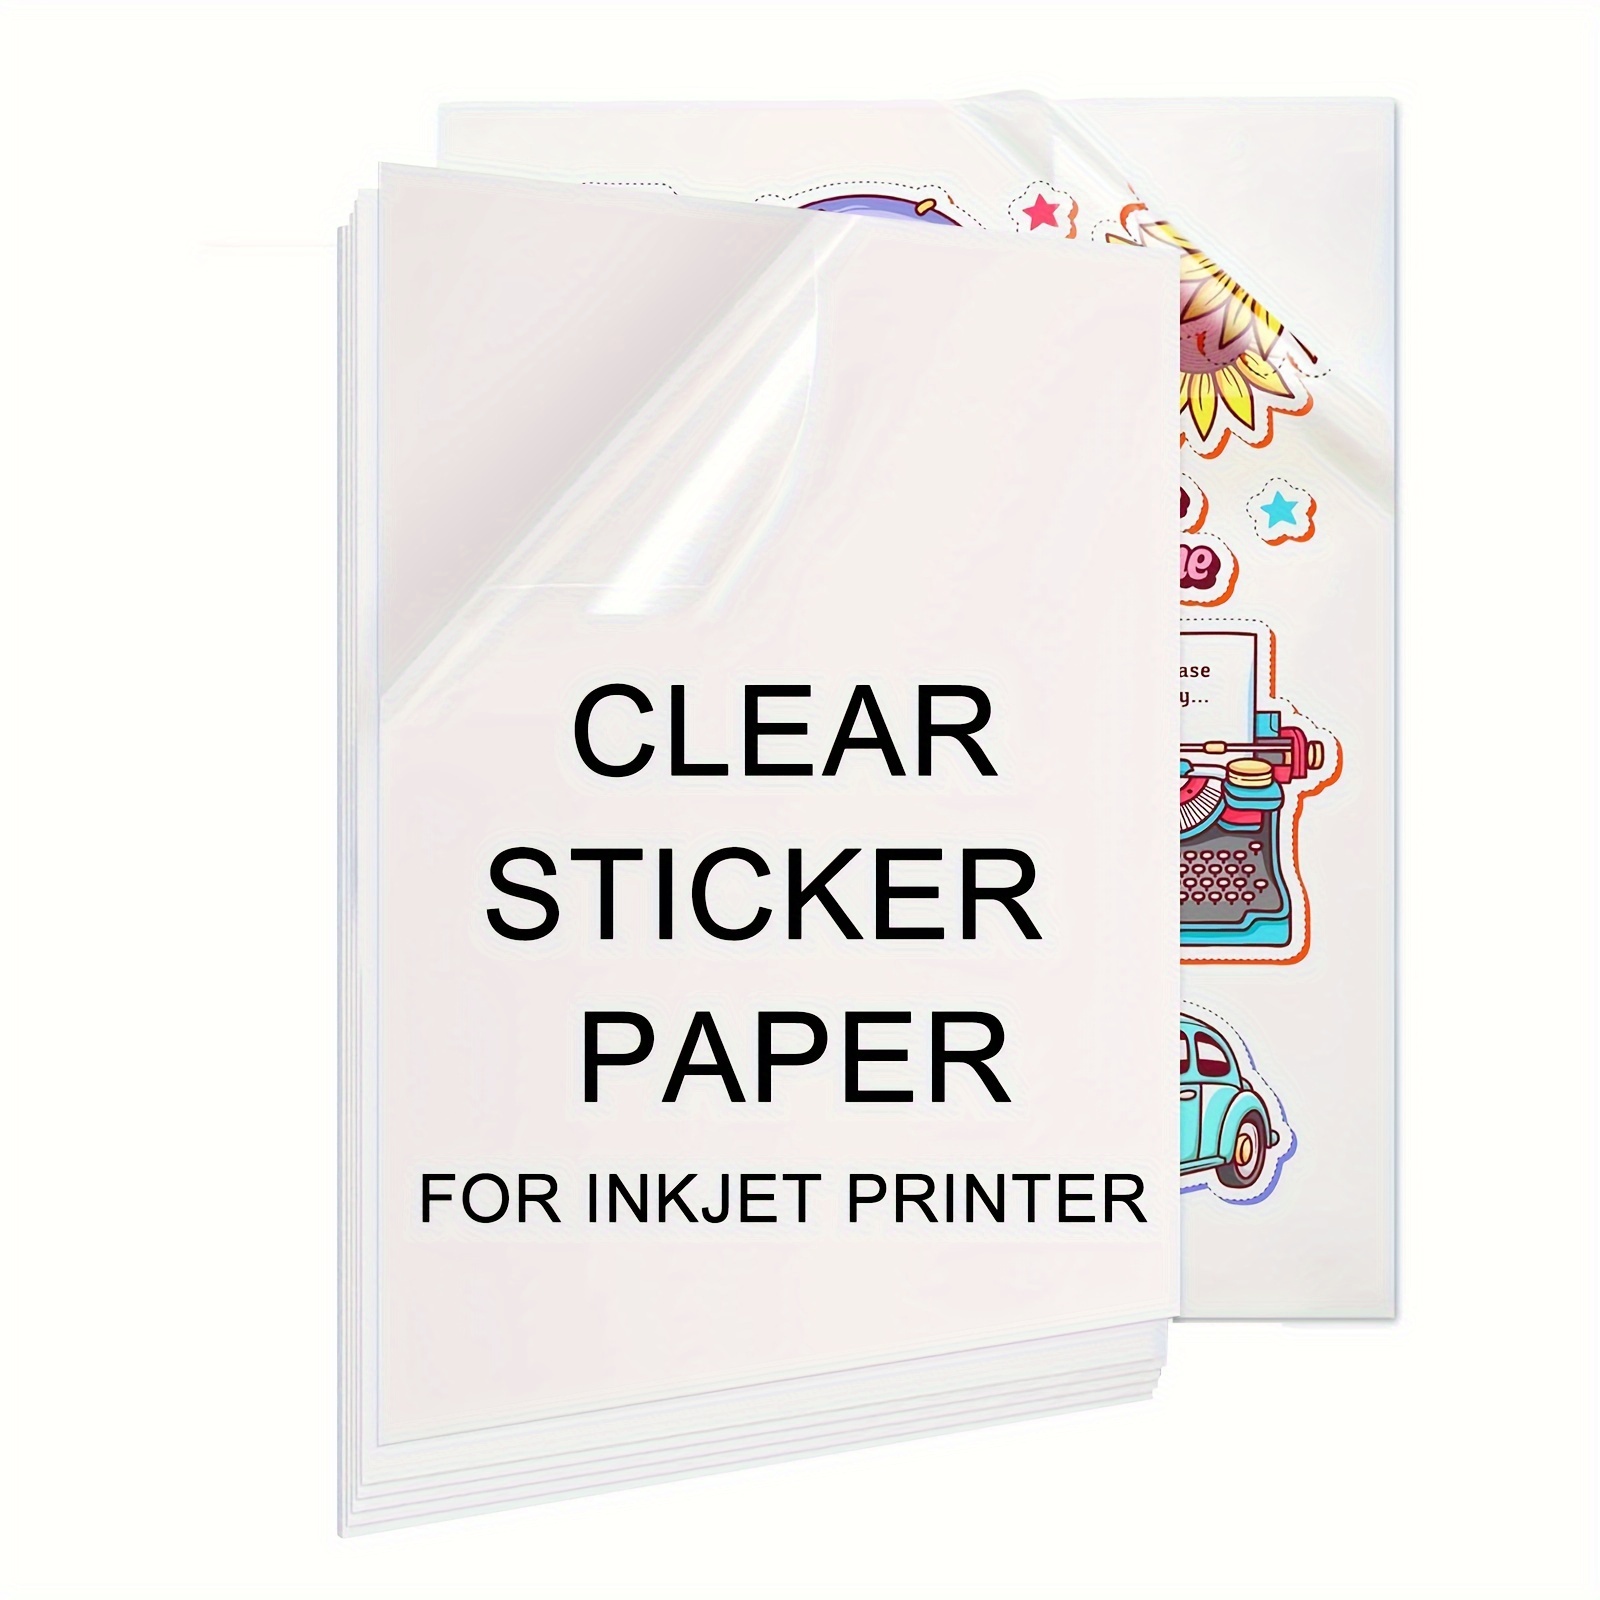 

Inkjet Printable Vinyl Sticker Paper - 20 Sheets, 100% Clear, Non-waterproof, Self-adhesive, Quick-dry, High-quality Ink Retention, 8.3"x11.7